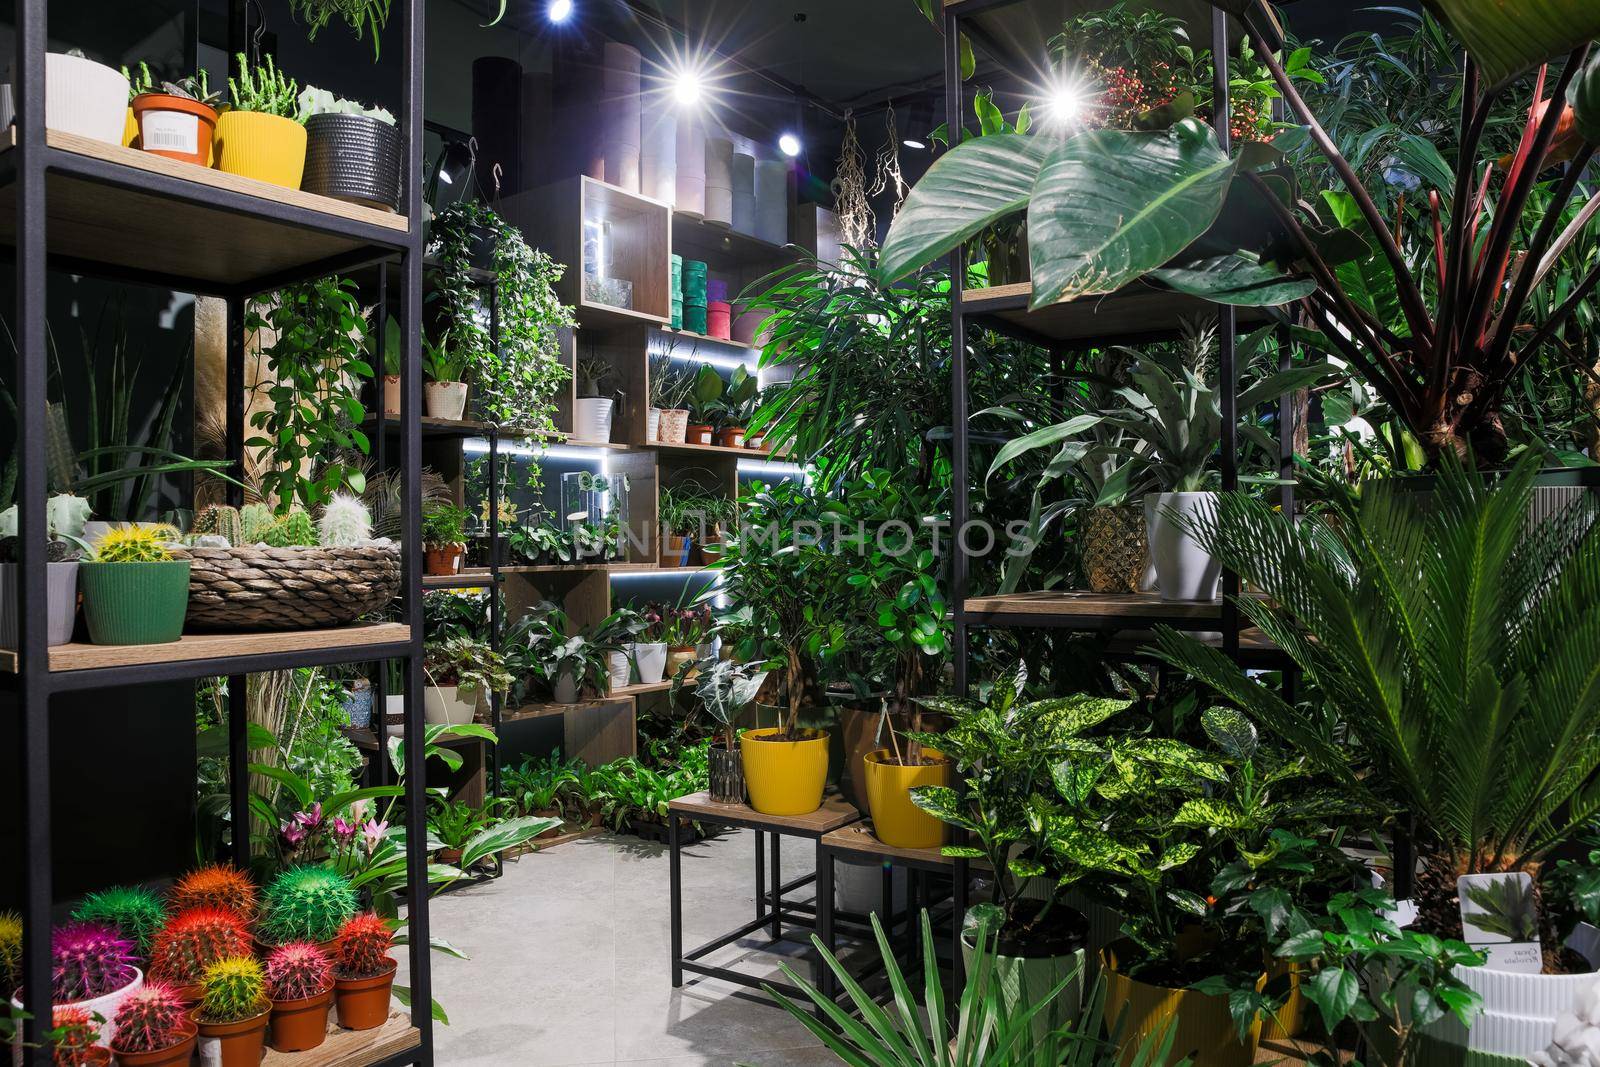 flower shop interior with potted plants on shelves.